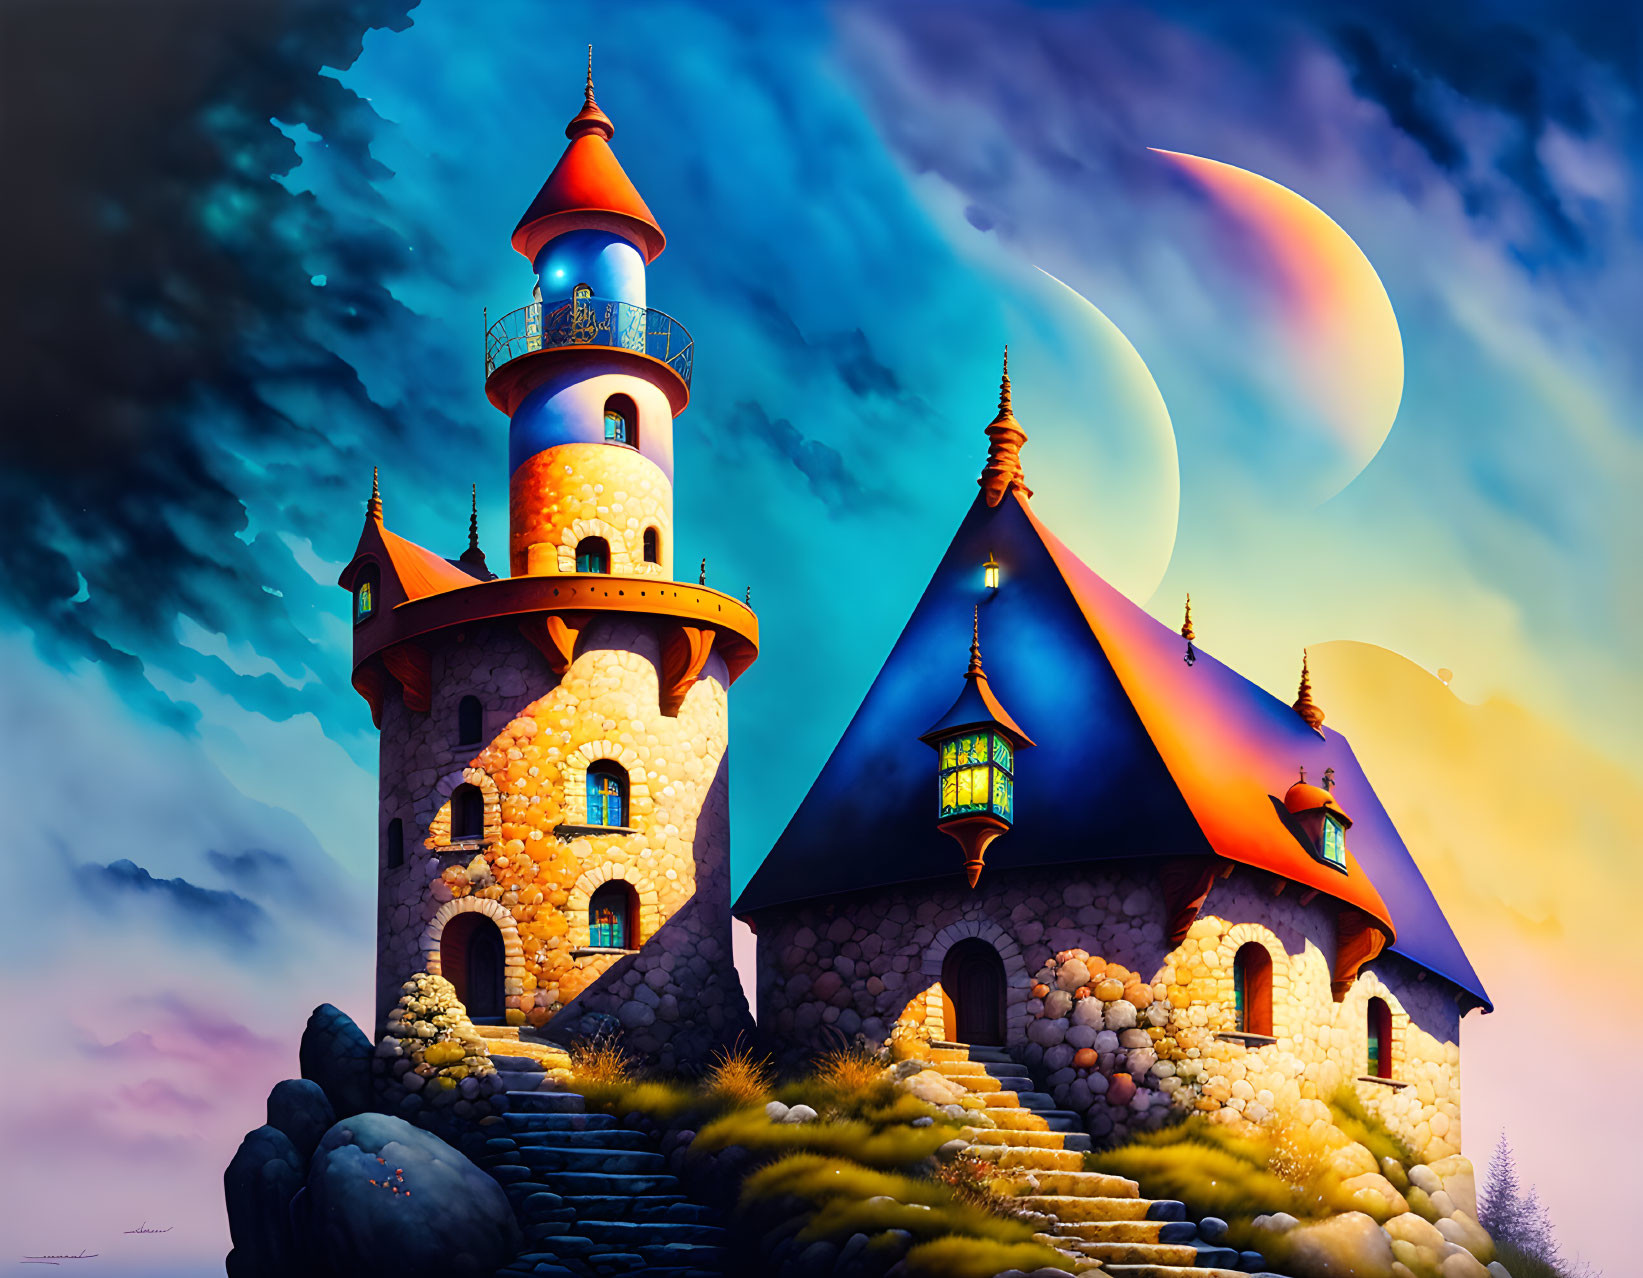 Fantasy stone castle with towers under twilight sky & crescent moon